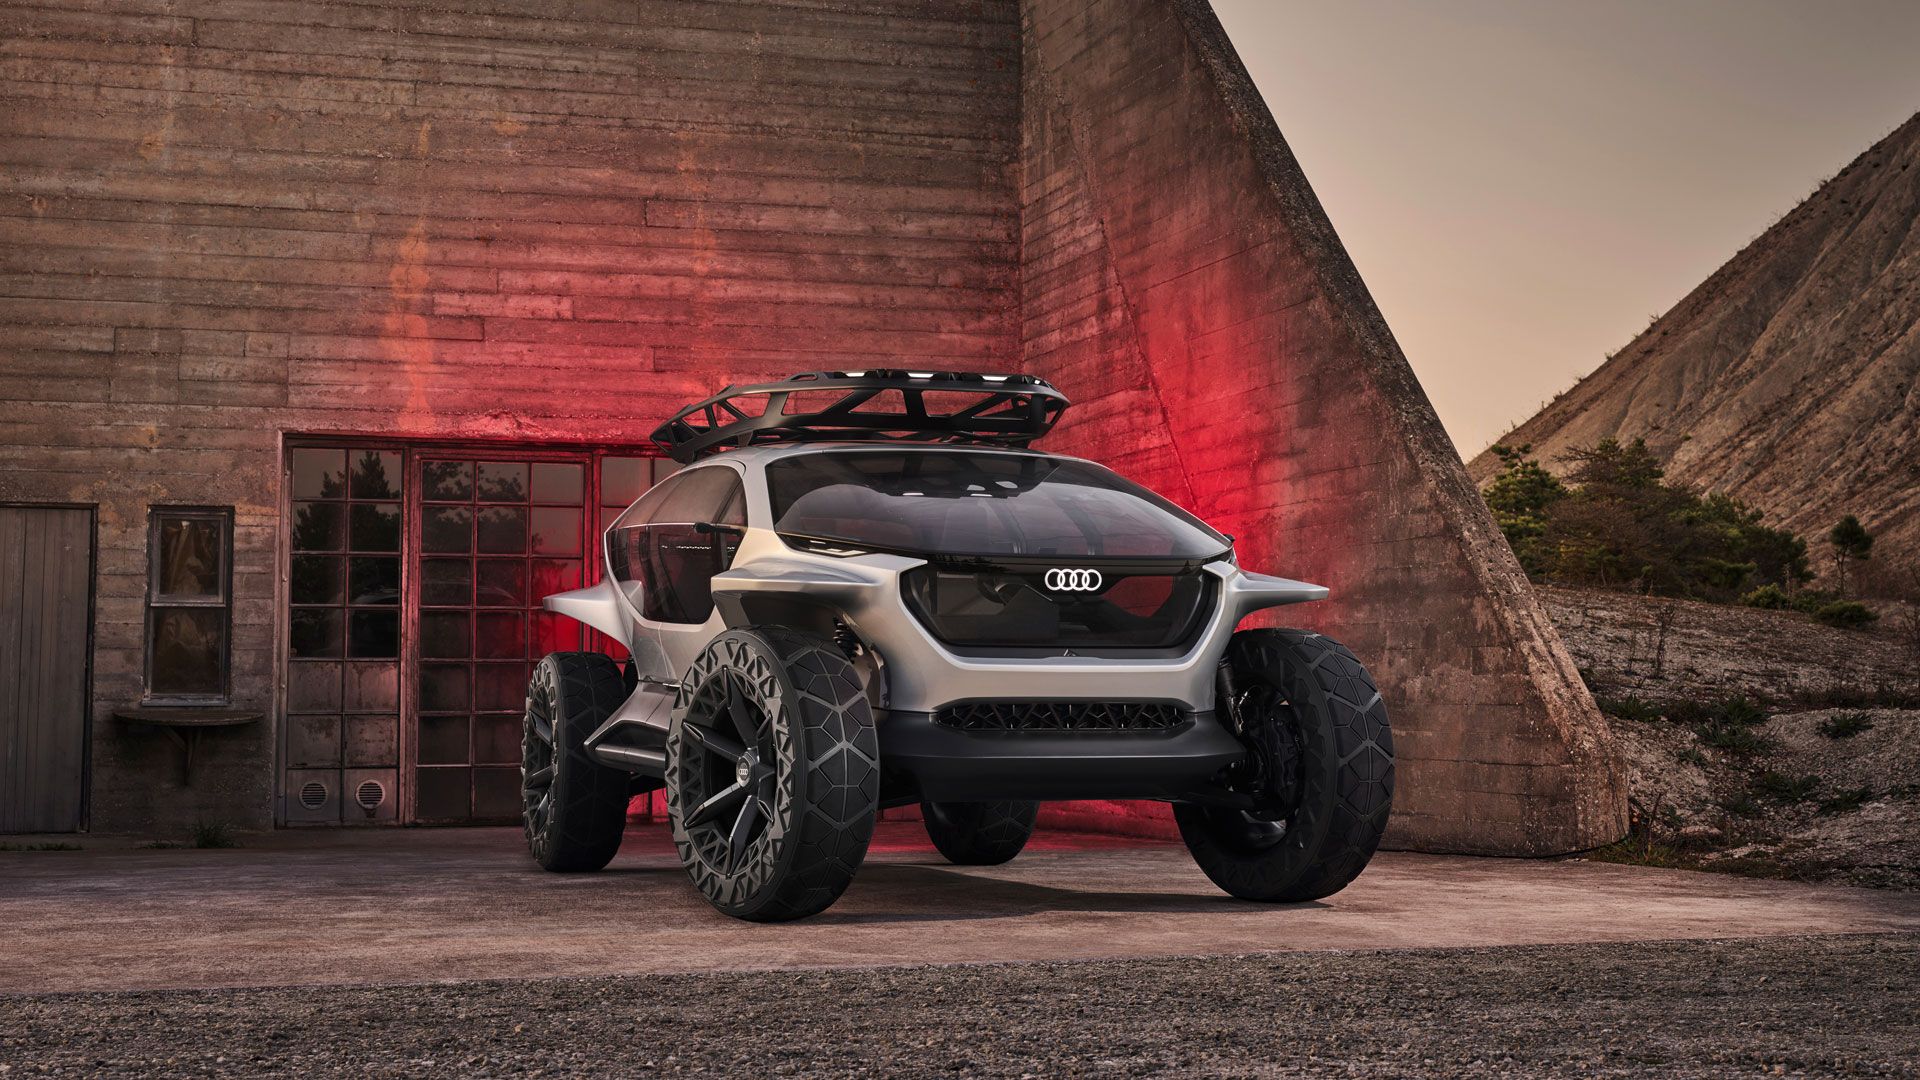 The Audi Ai Trail Audi Concept Car 2019 And The Great Outdoors